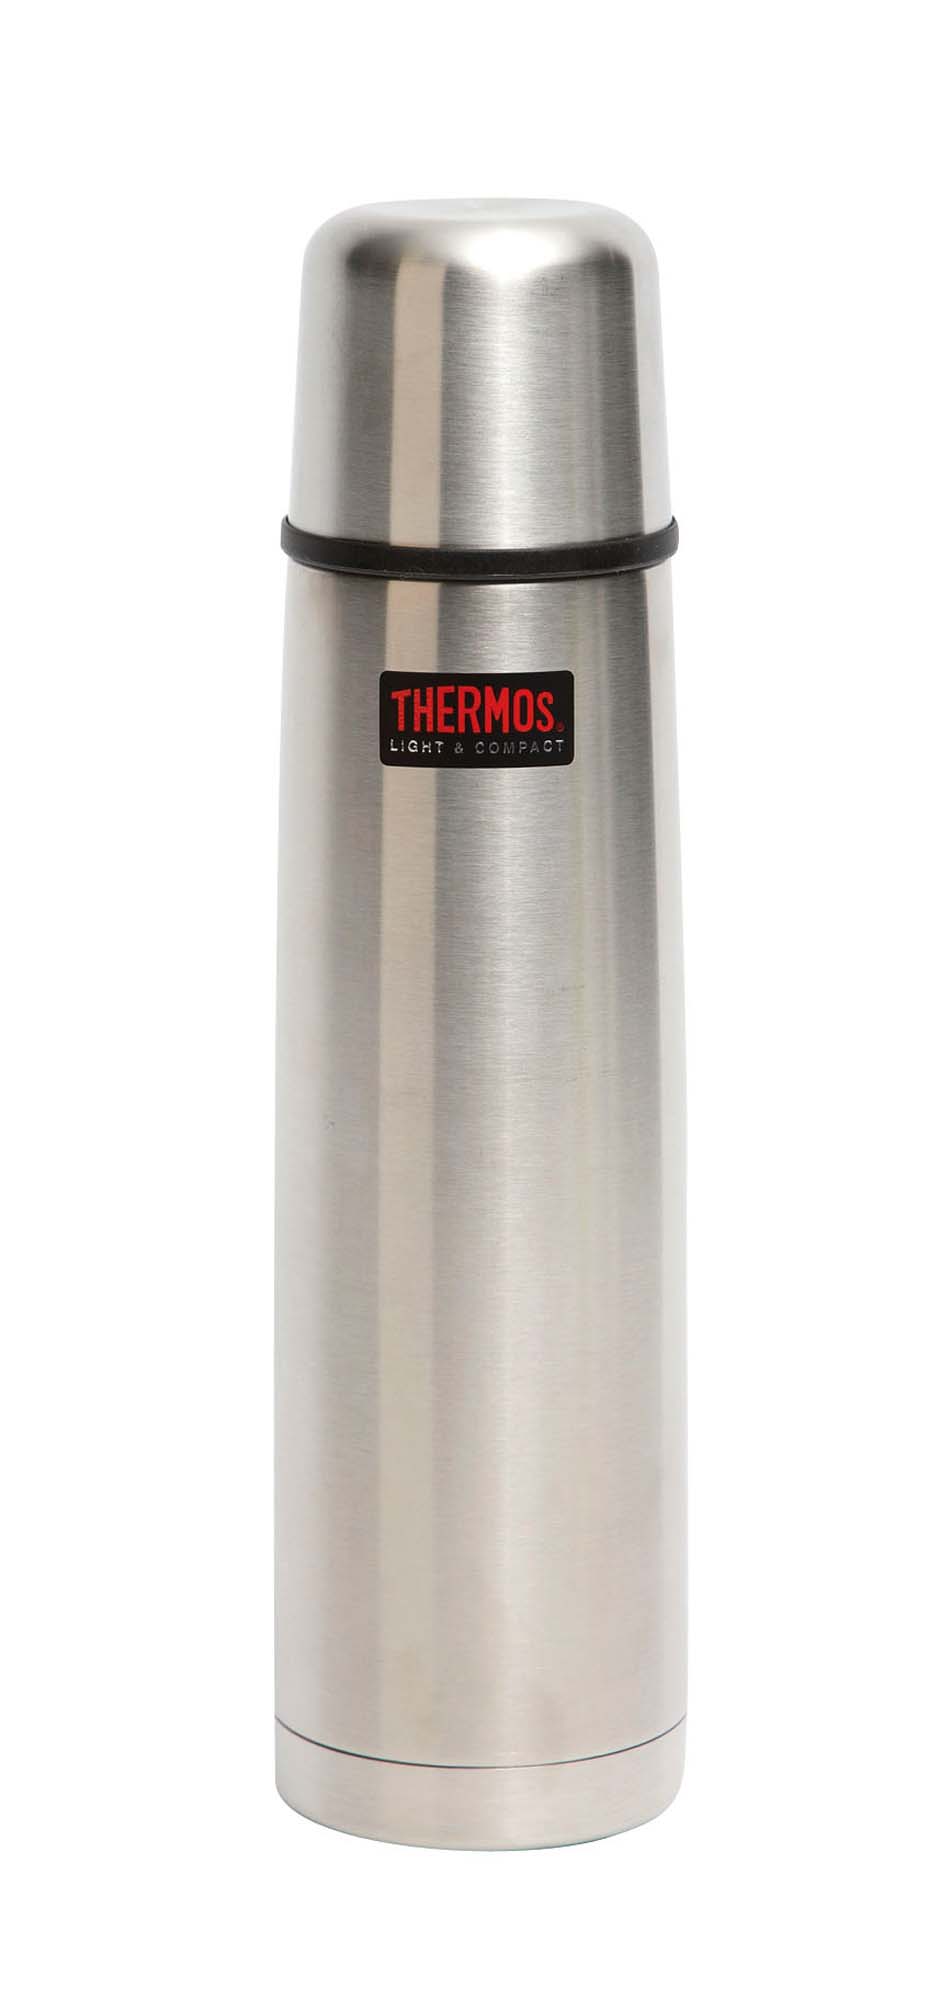 BO CAMP Thermos Isoleerfles Thermax 1ltr